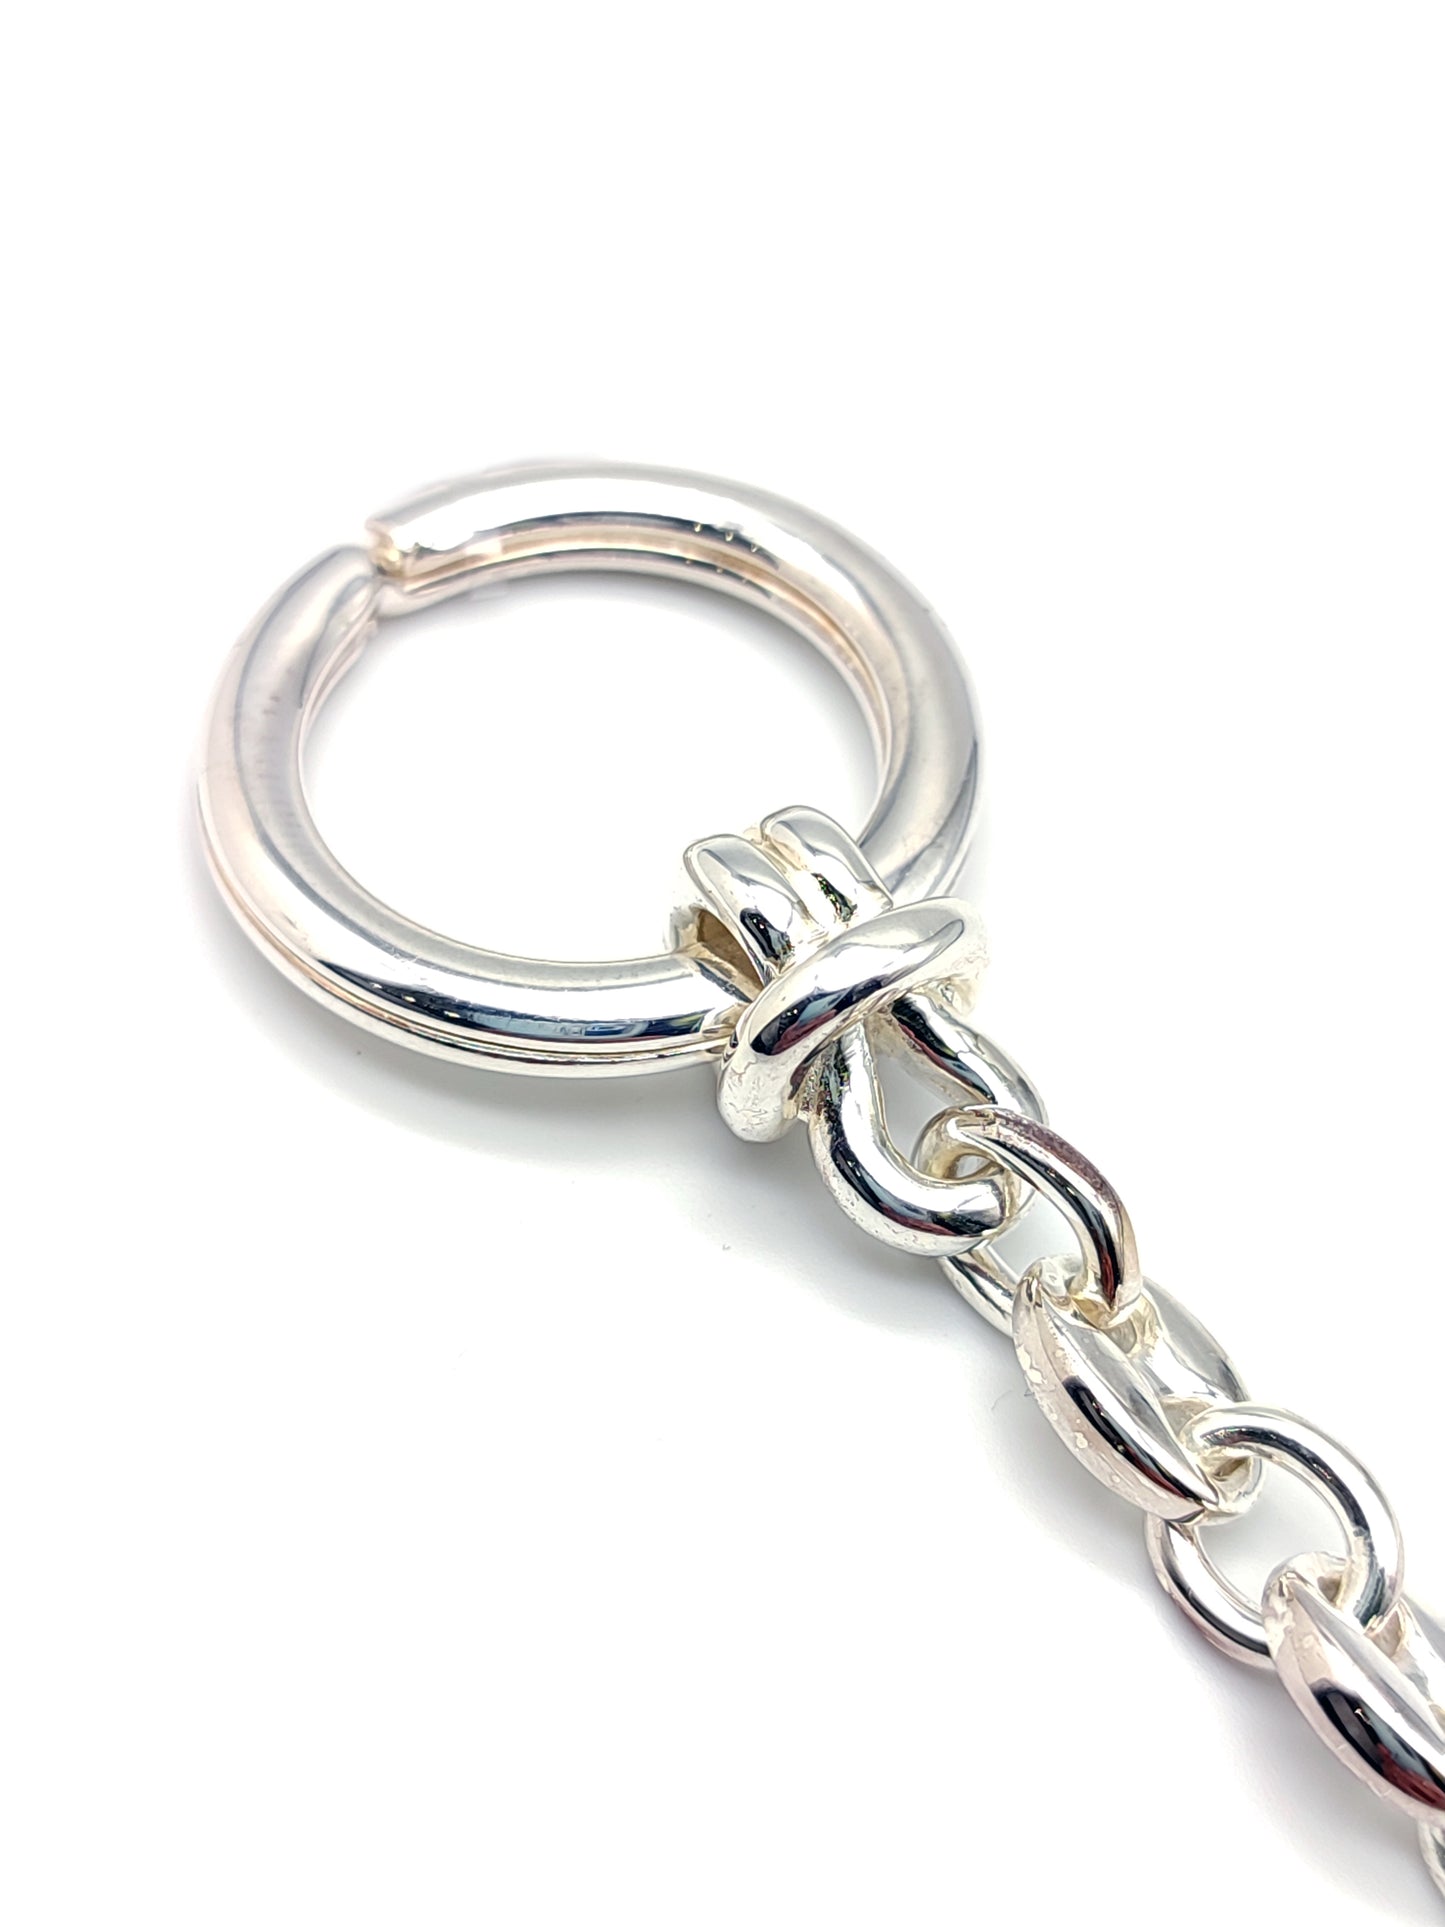 Solid silver key ring with propeller